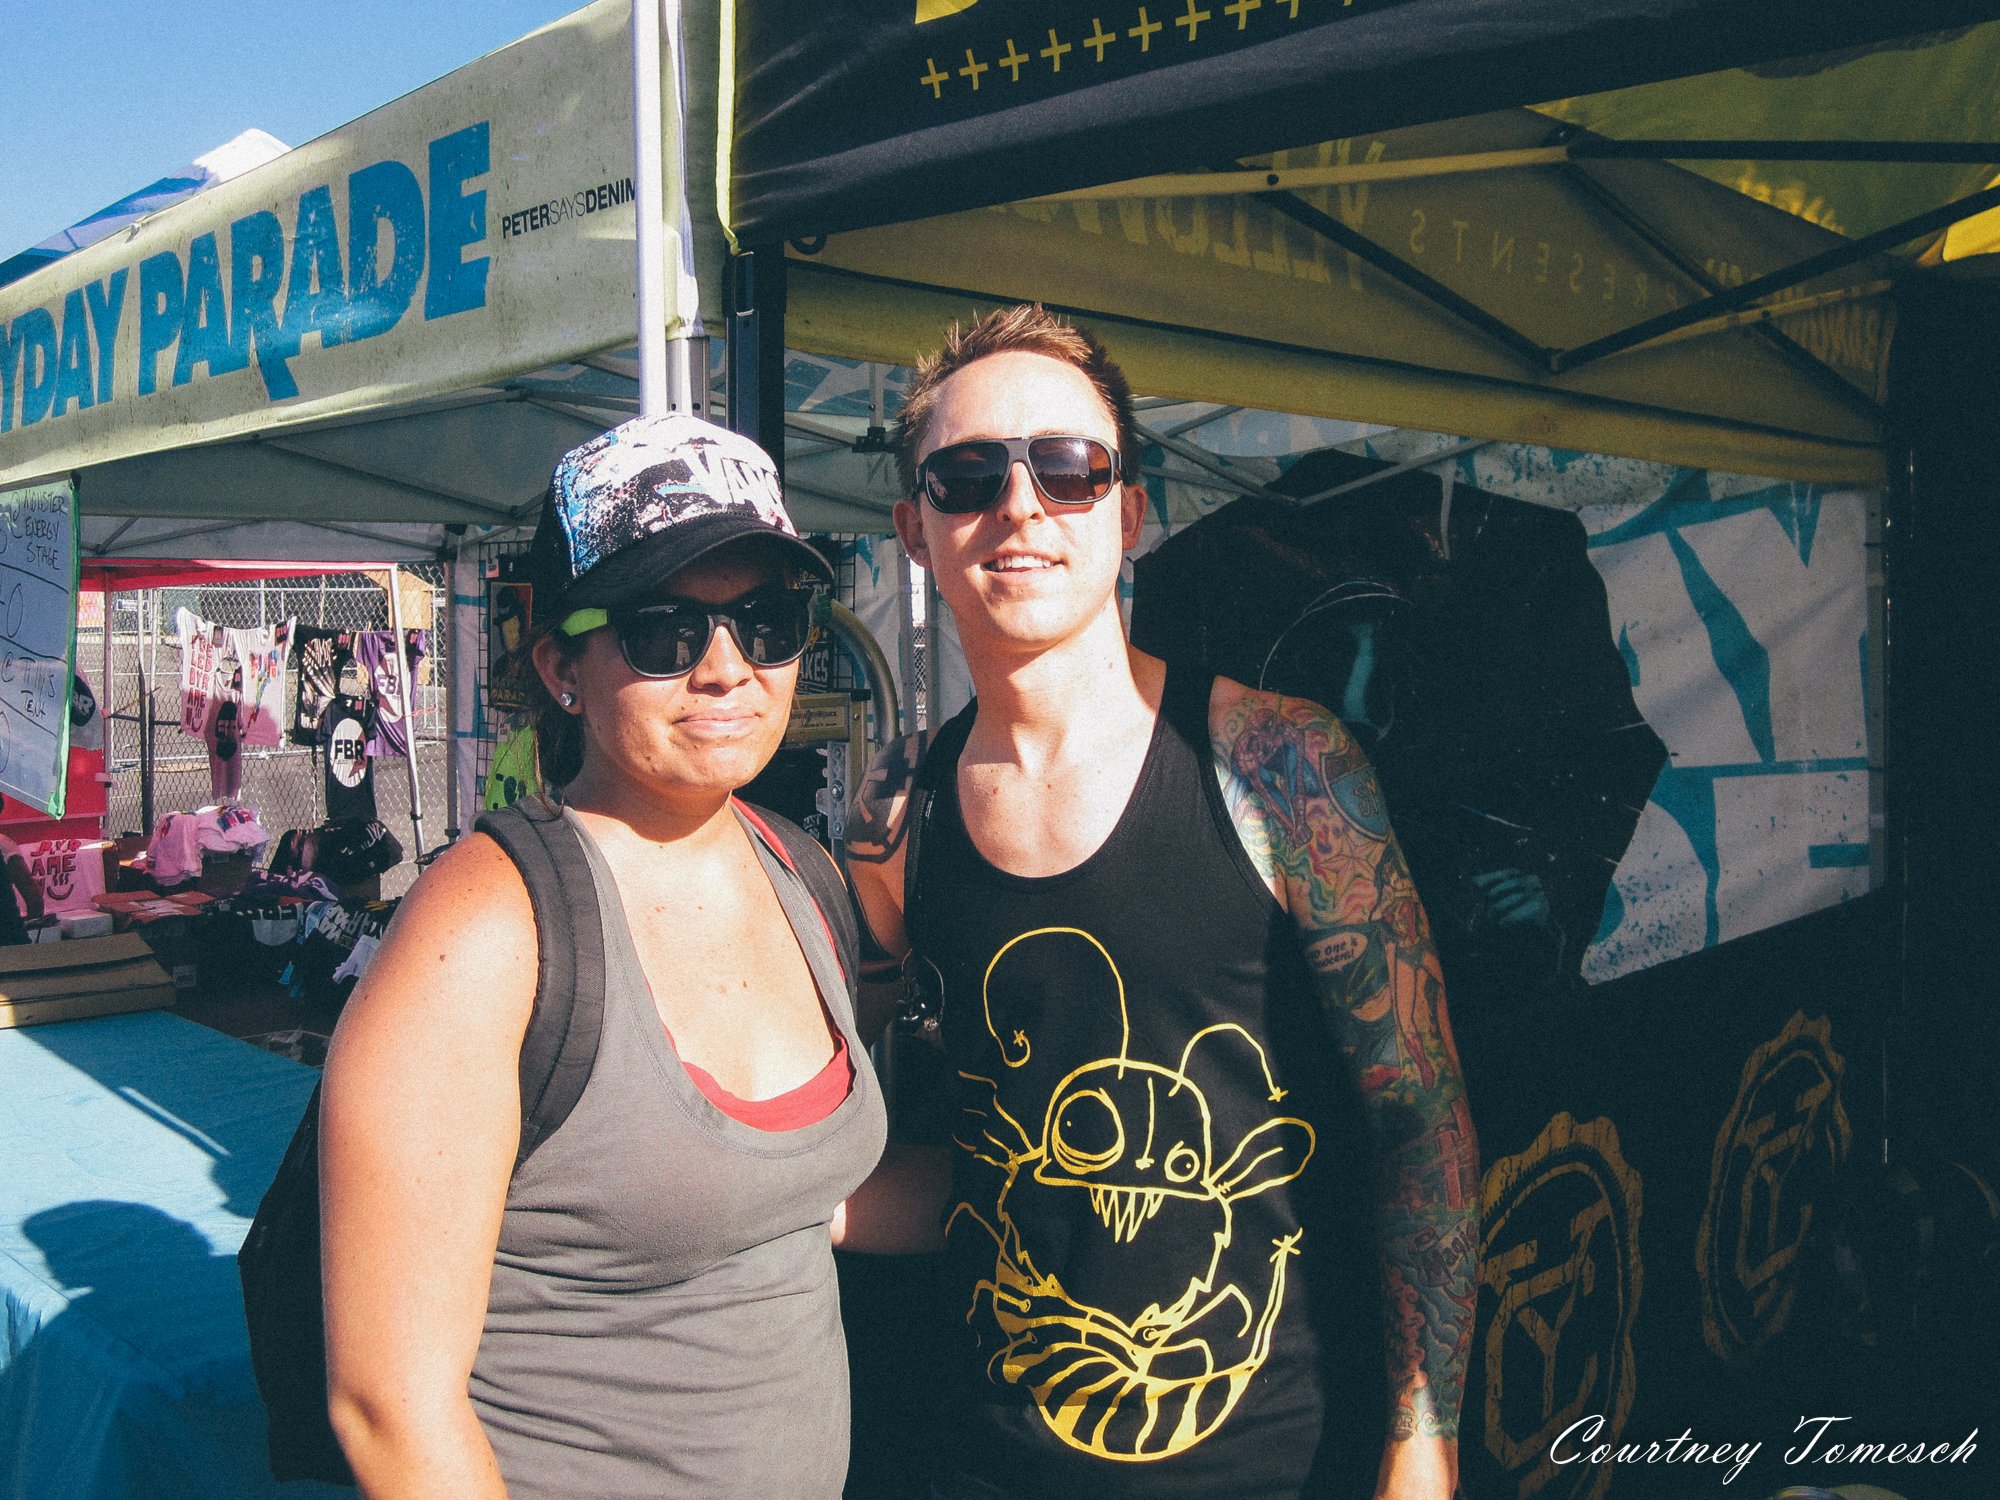 Meet Ryan from Yellowcard after his set!